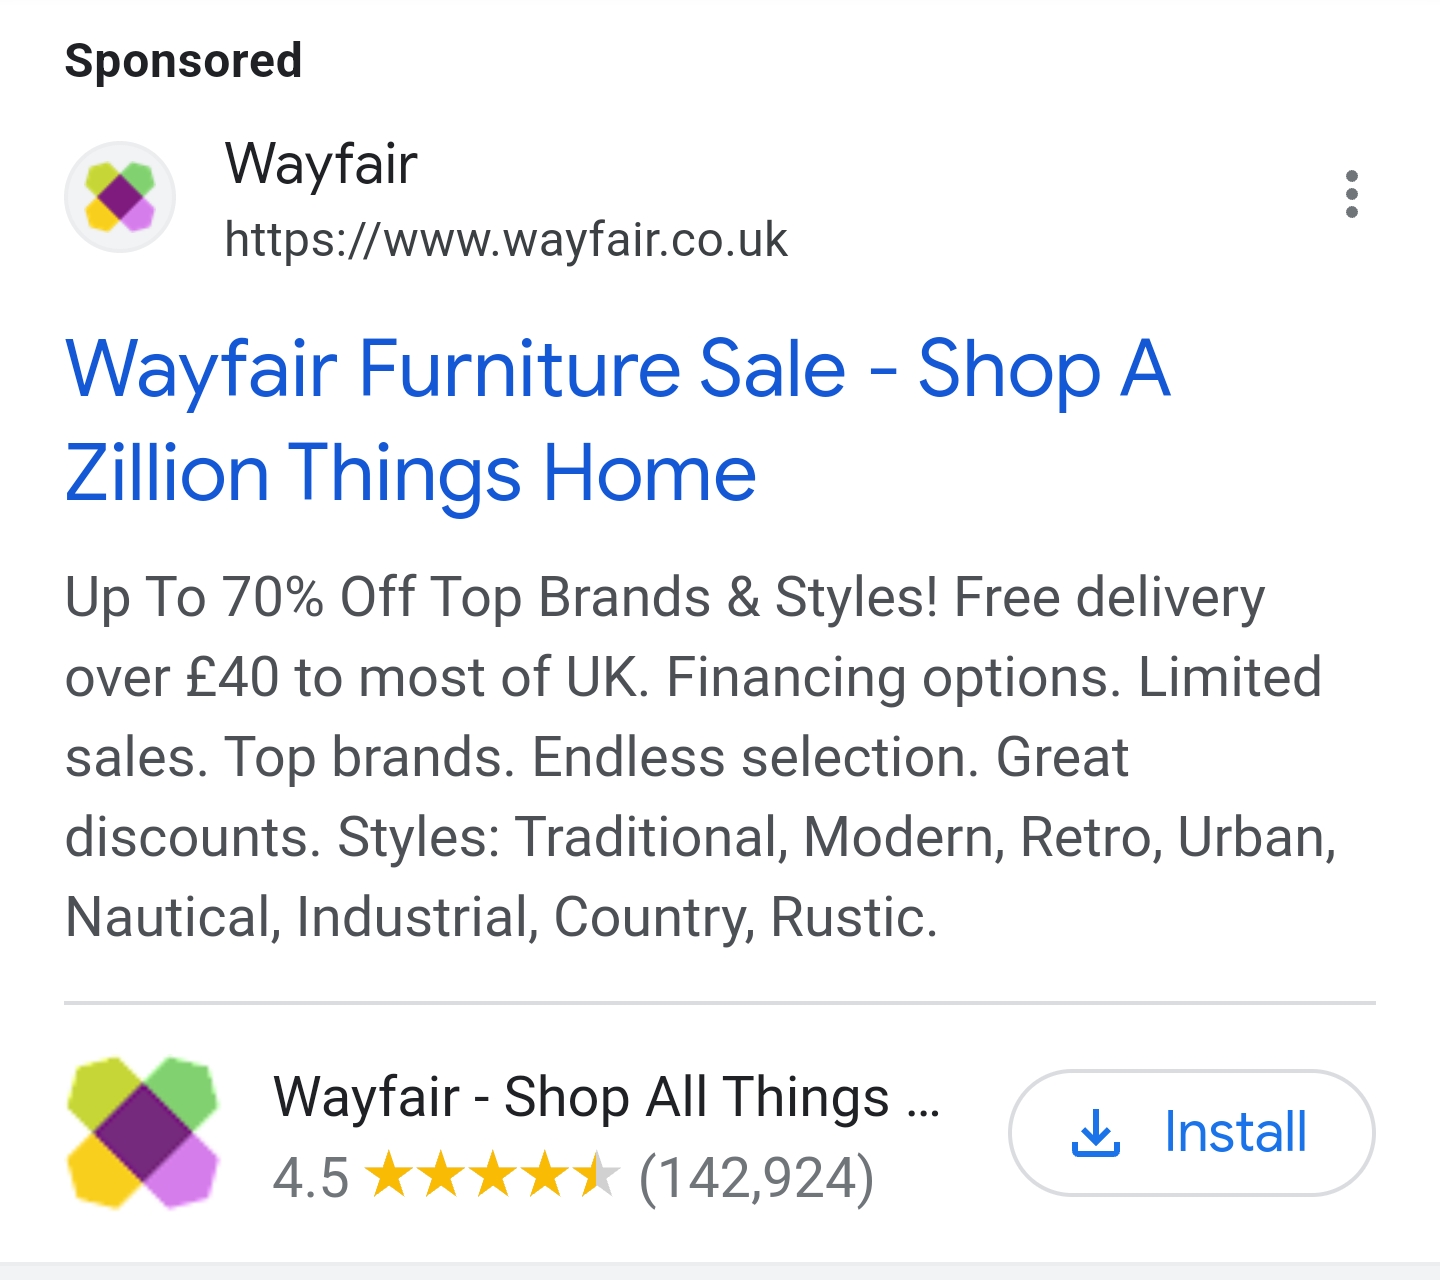 Example of a Google Search ad with an app extension